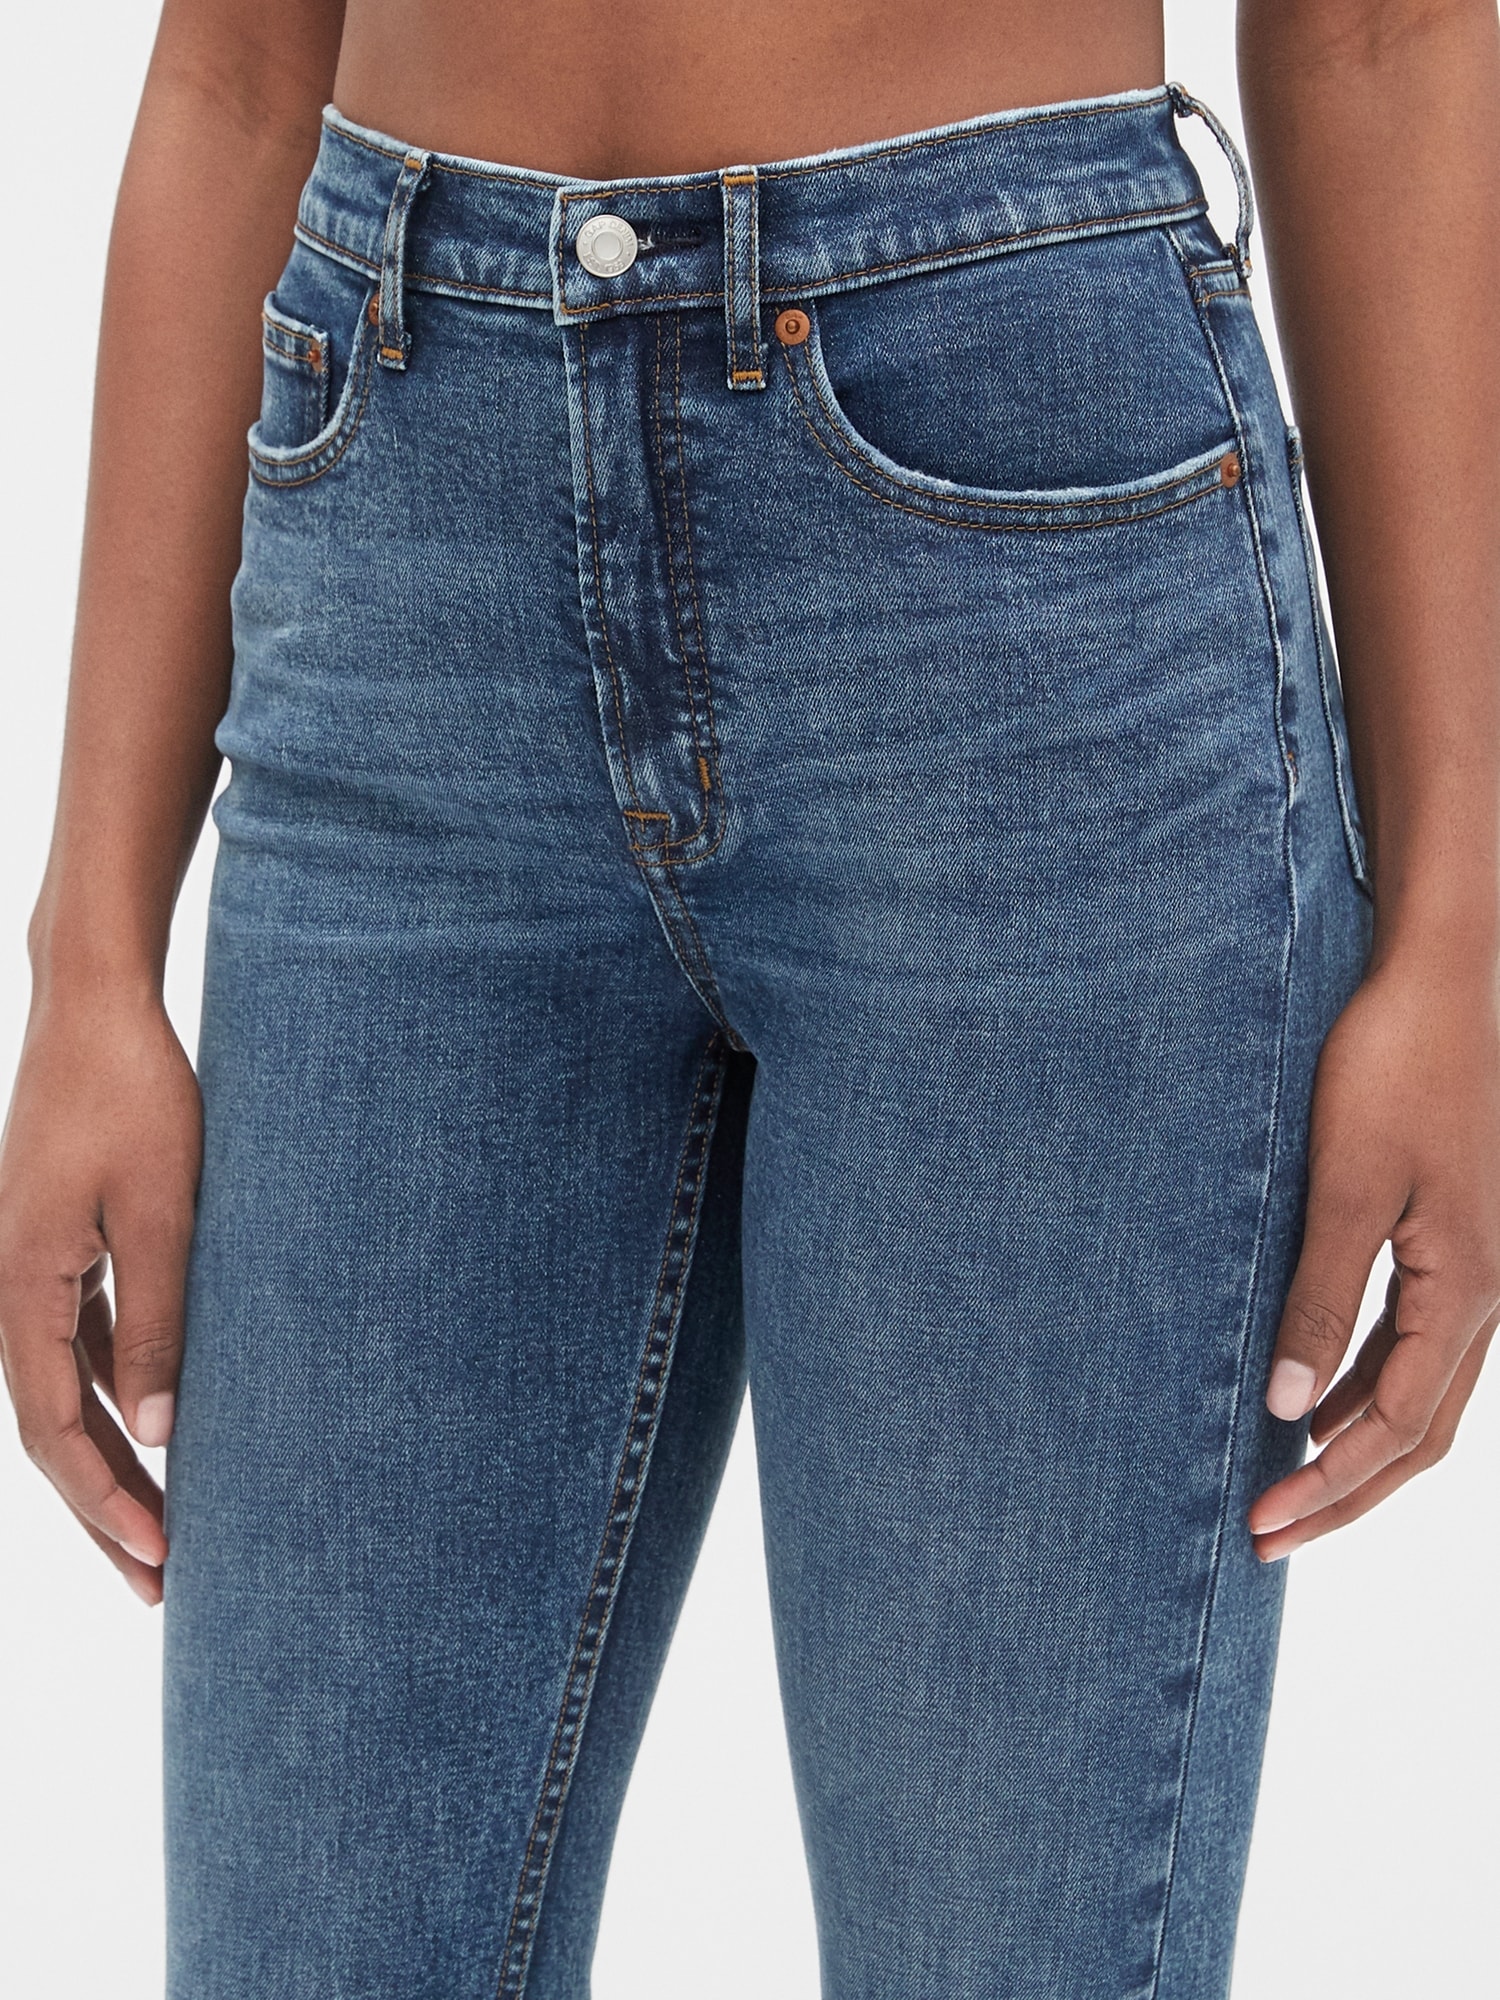 High Rise Cigarette Jeans with Secret Smoothing Pockets Gap